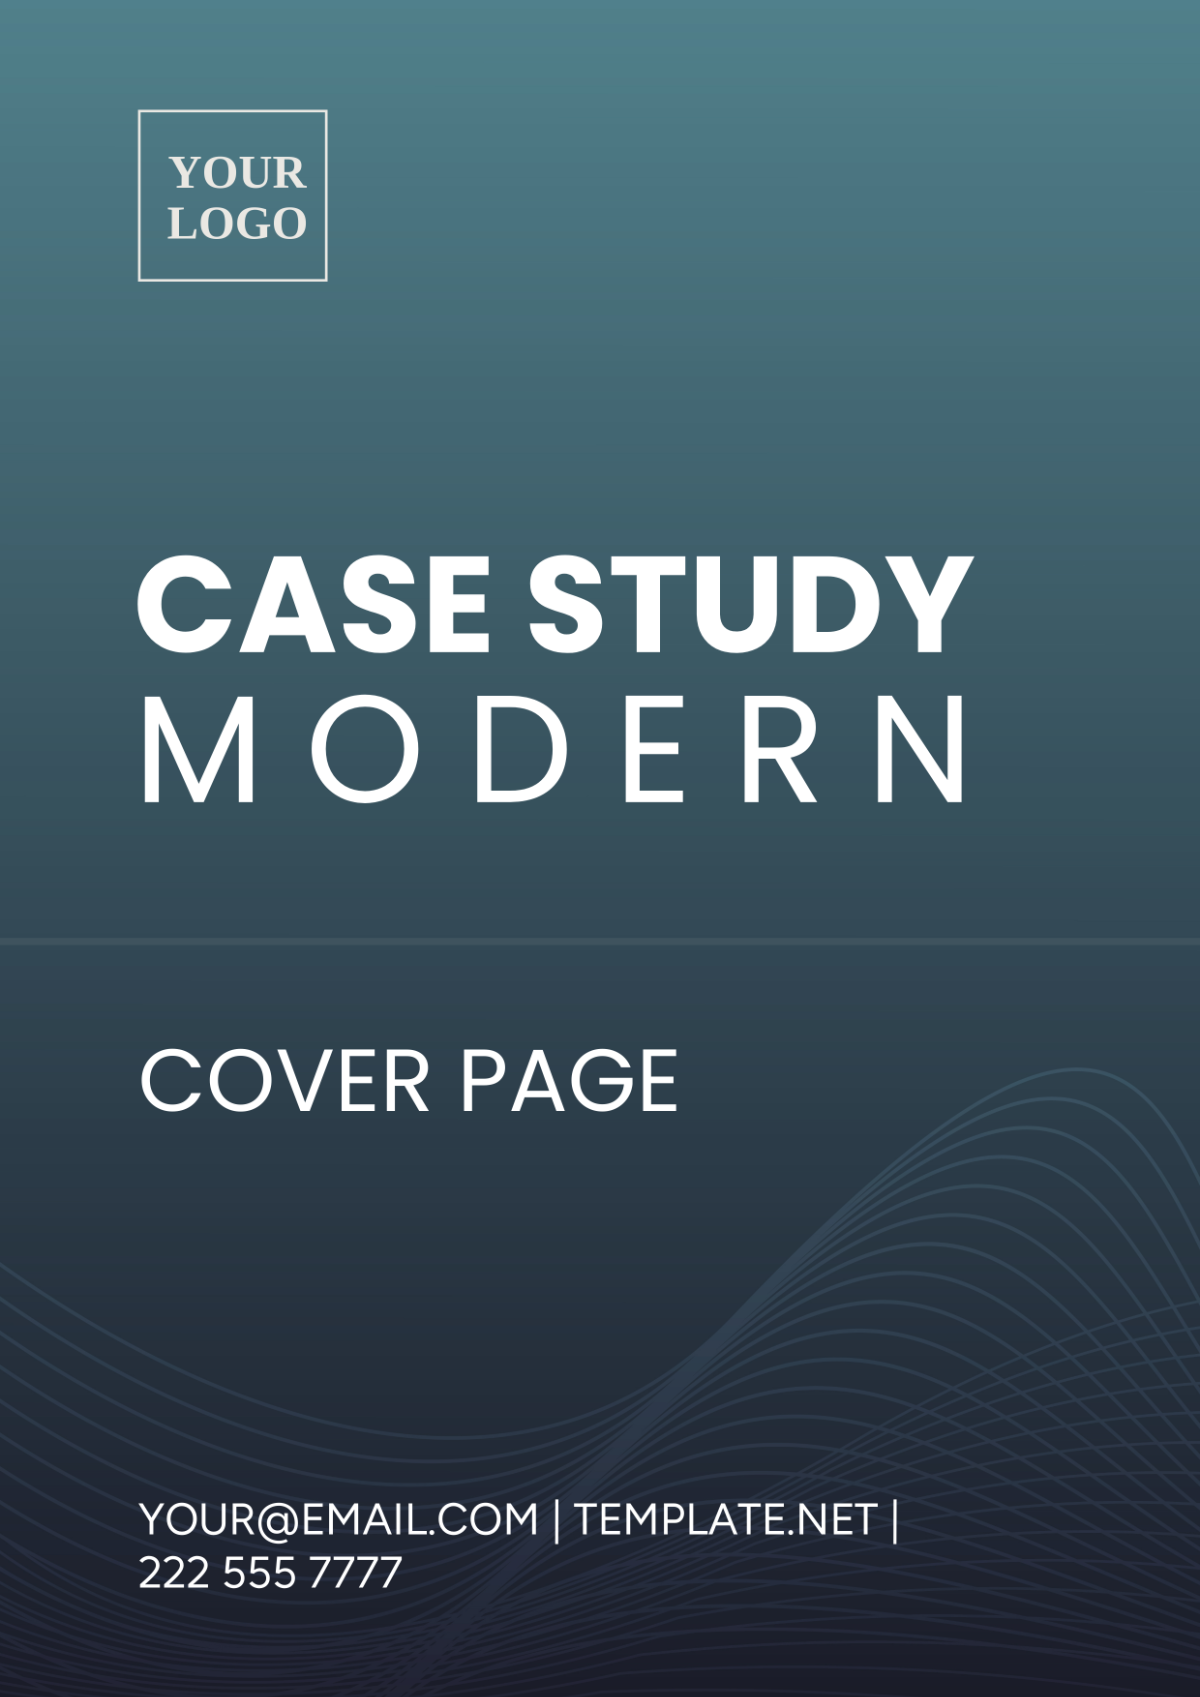 Case Study Modern Cover Page Template